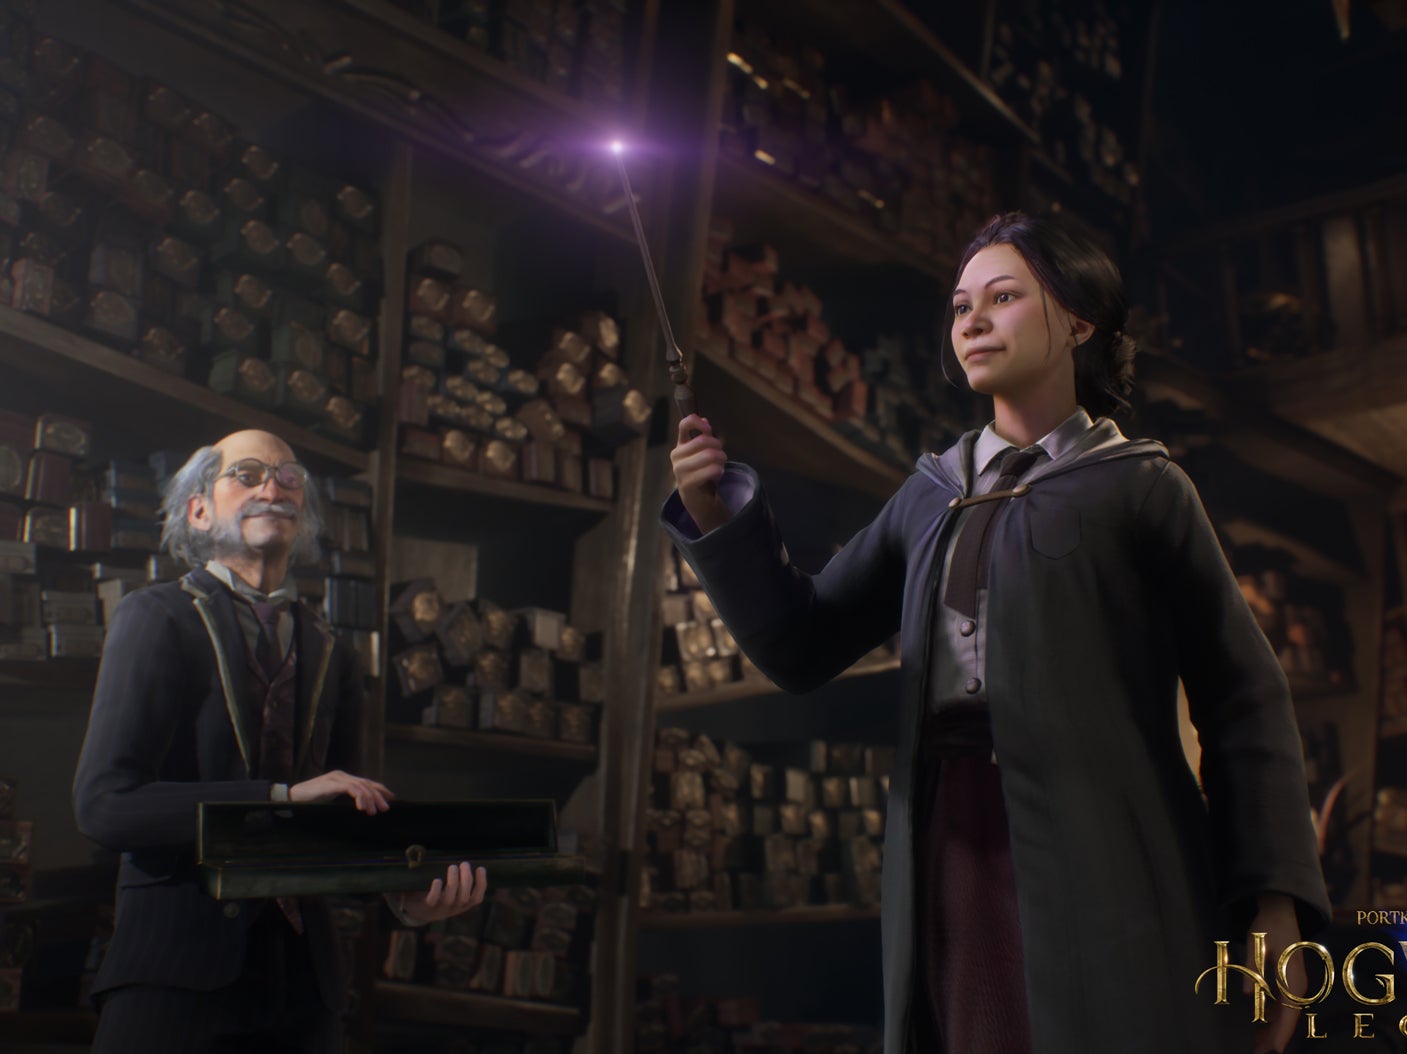 An image from the forthcoming video game Hogwarts Legacy